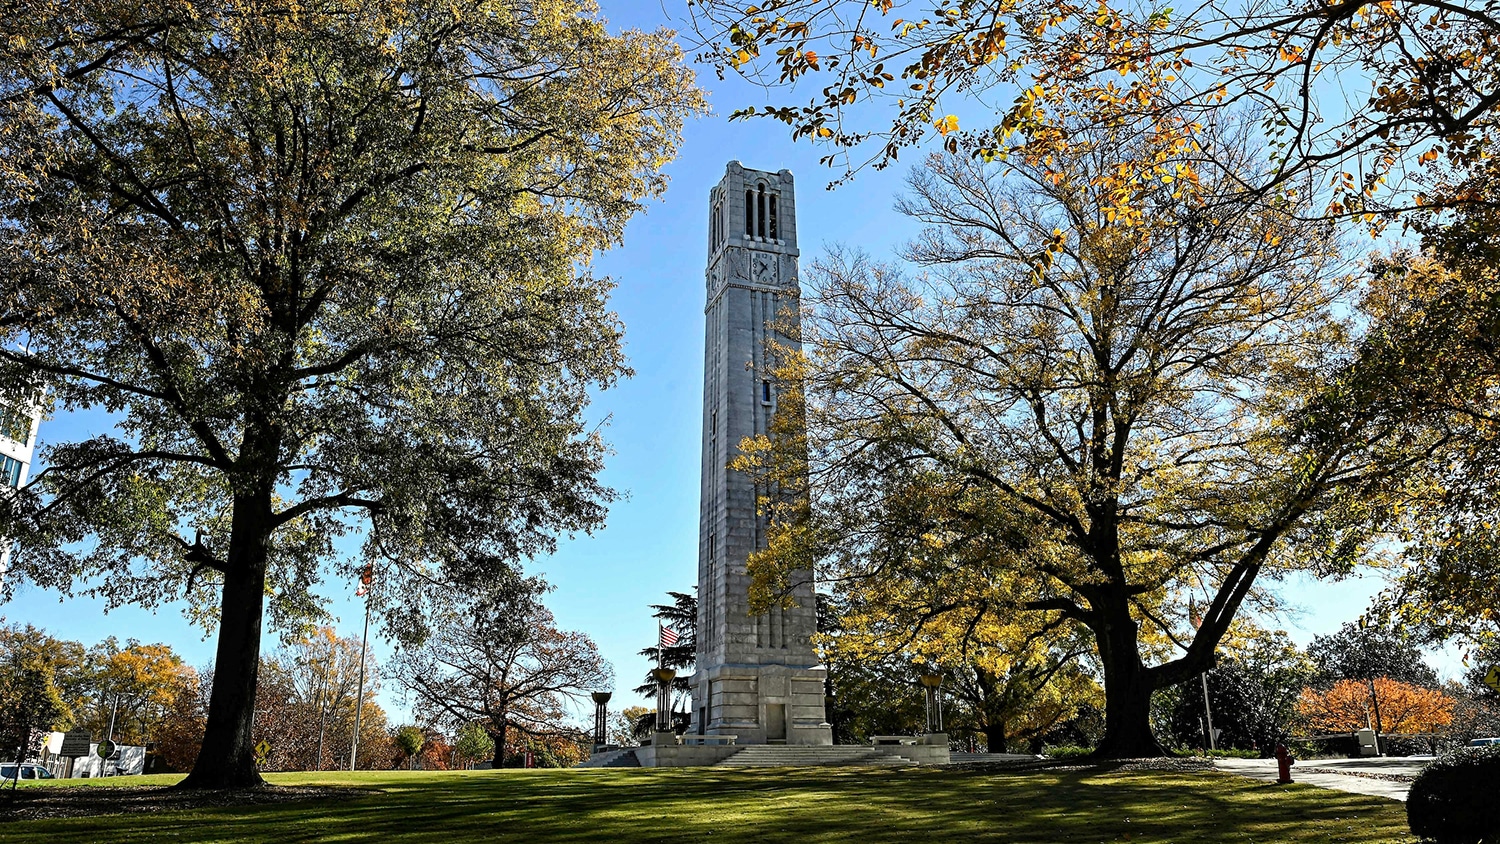 The NC State Belltower on a fall day. Photo by Marc Hall